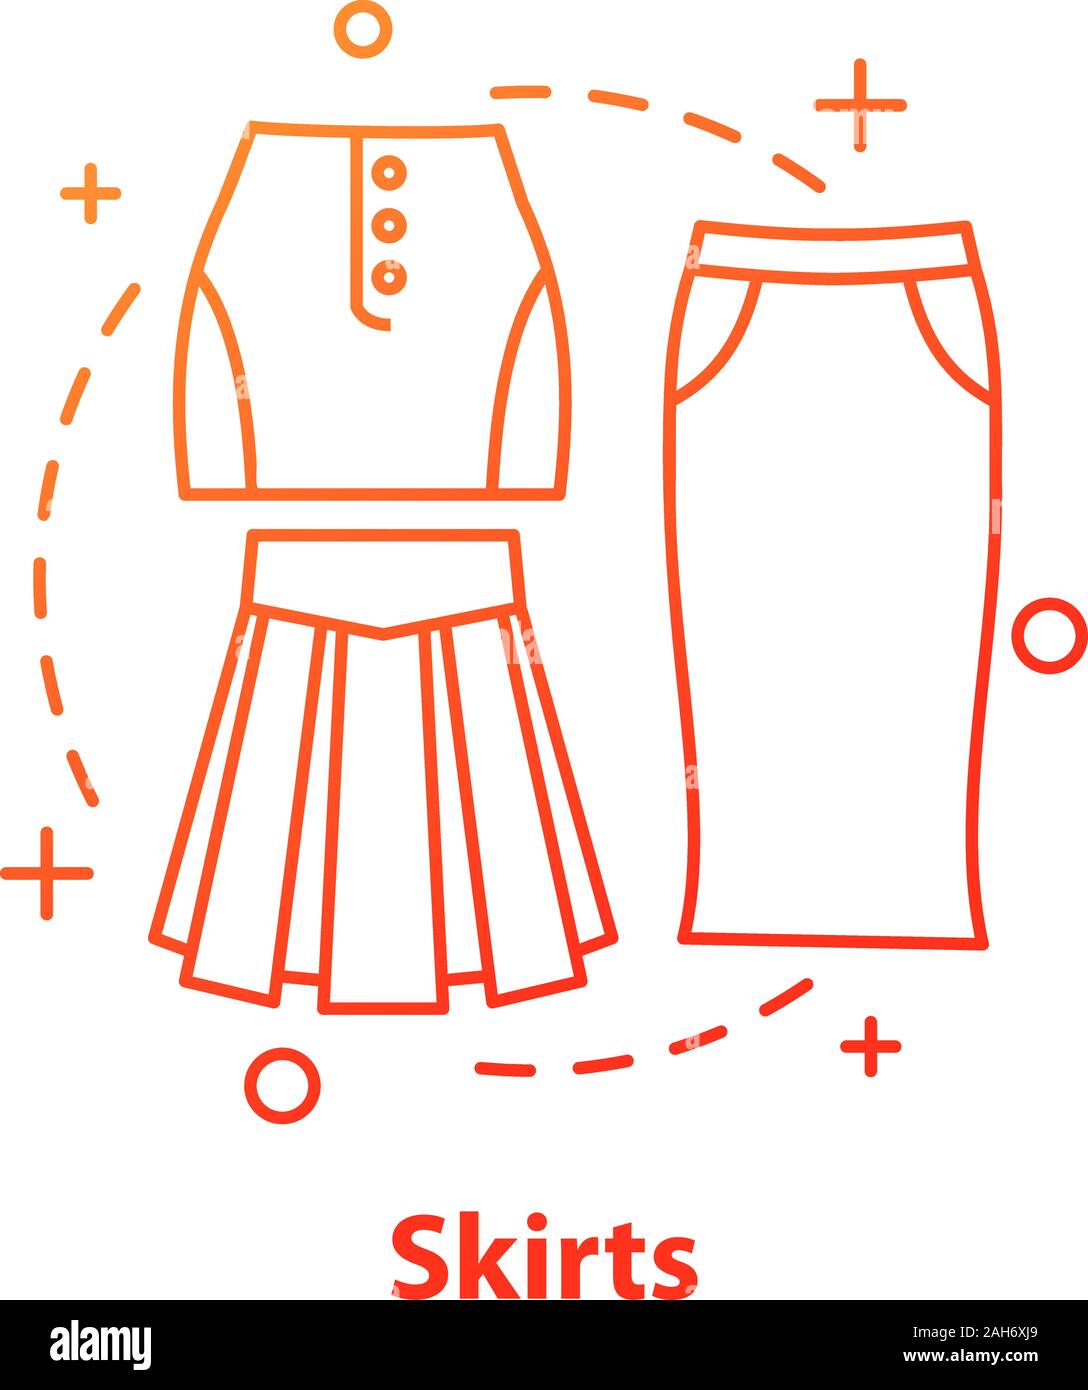 Skirts concept icon. Women's wear. Clothing store idea thin line ...